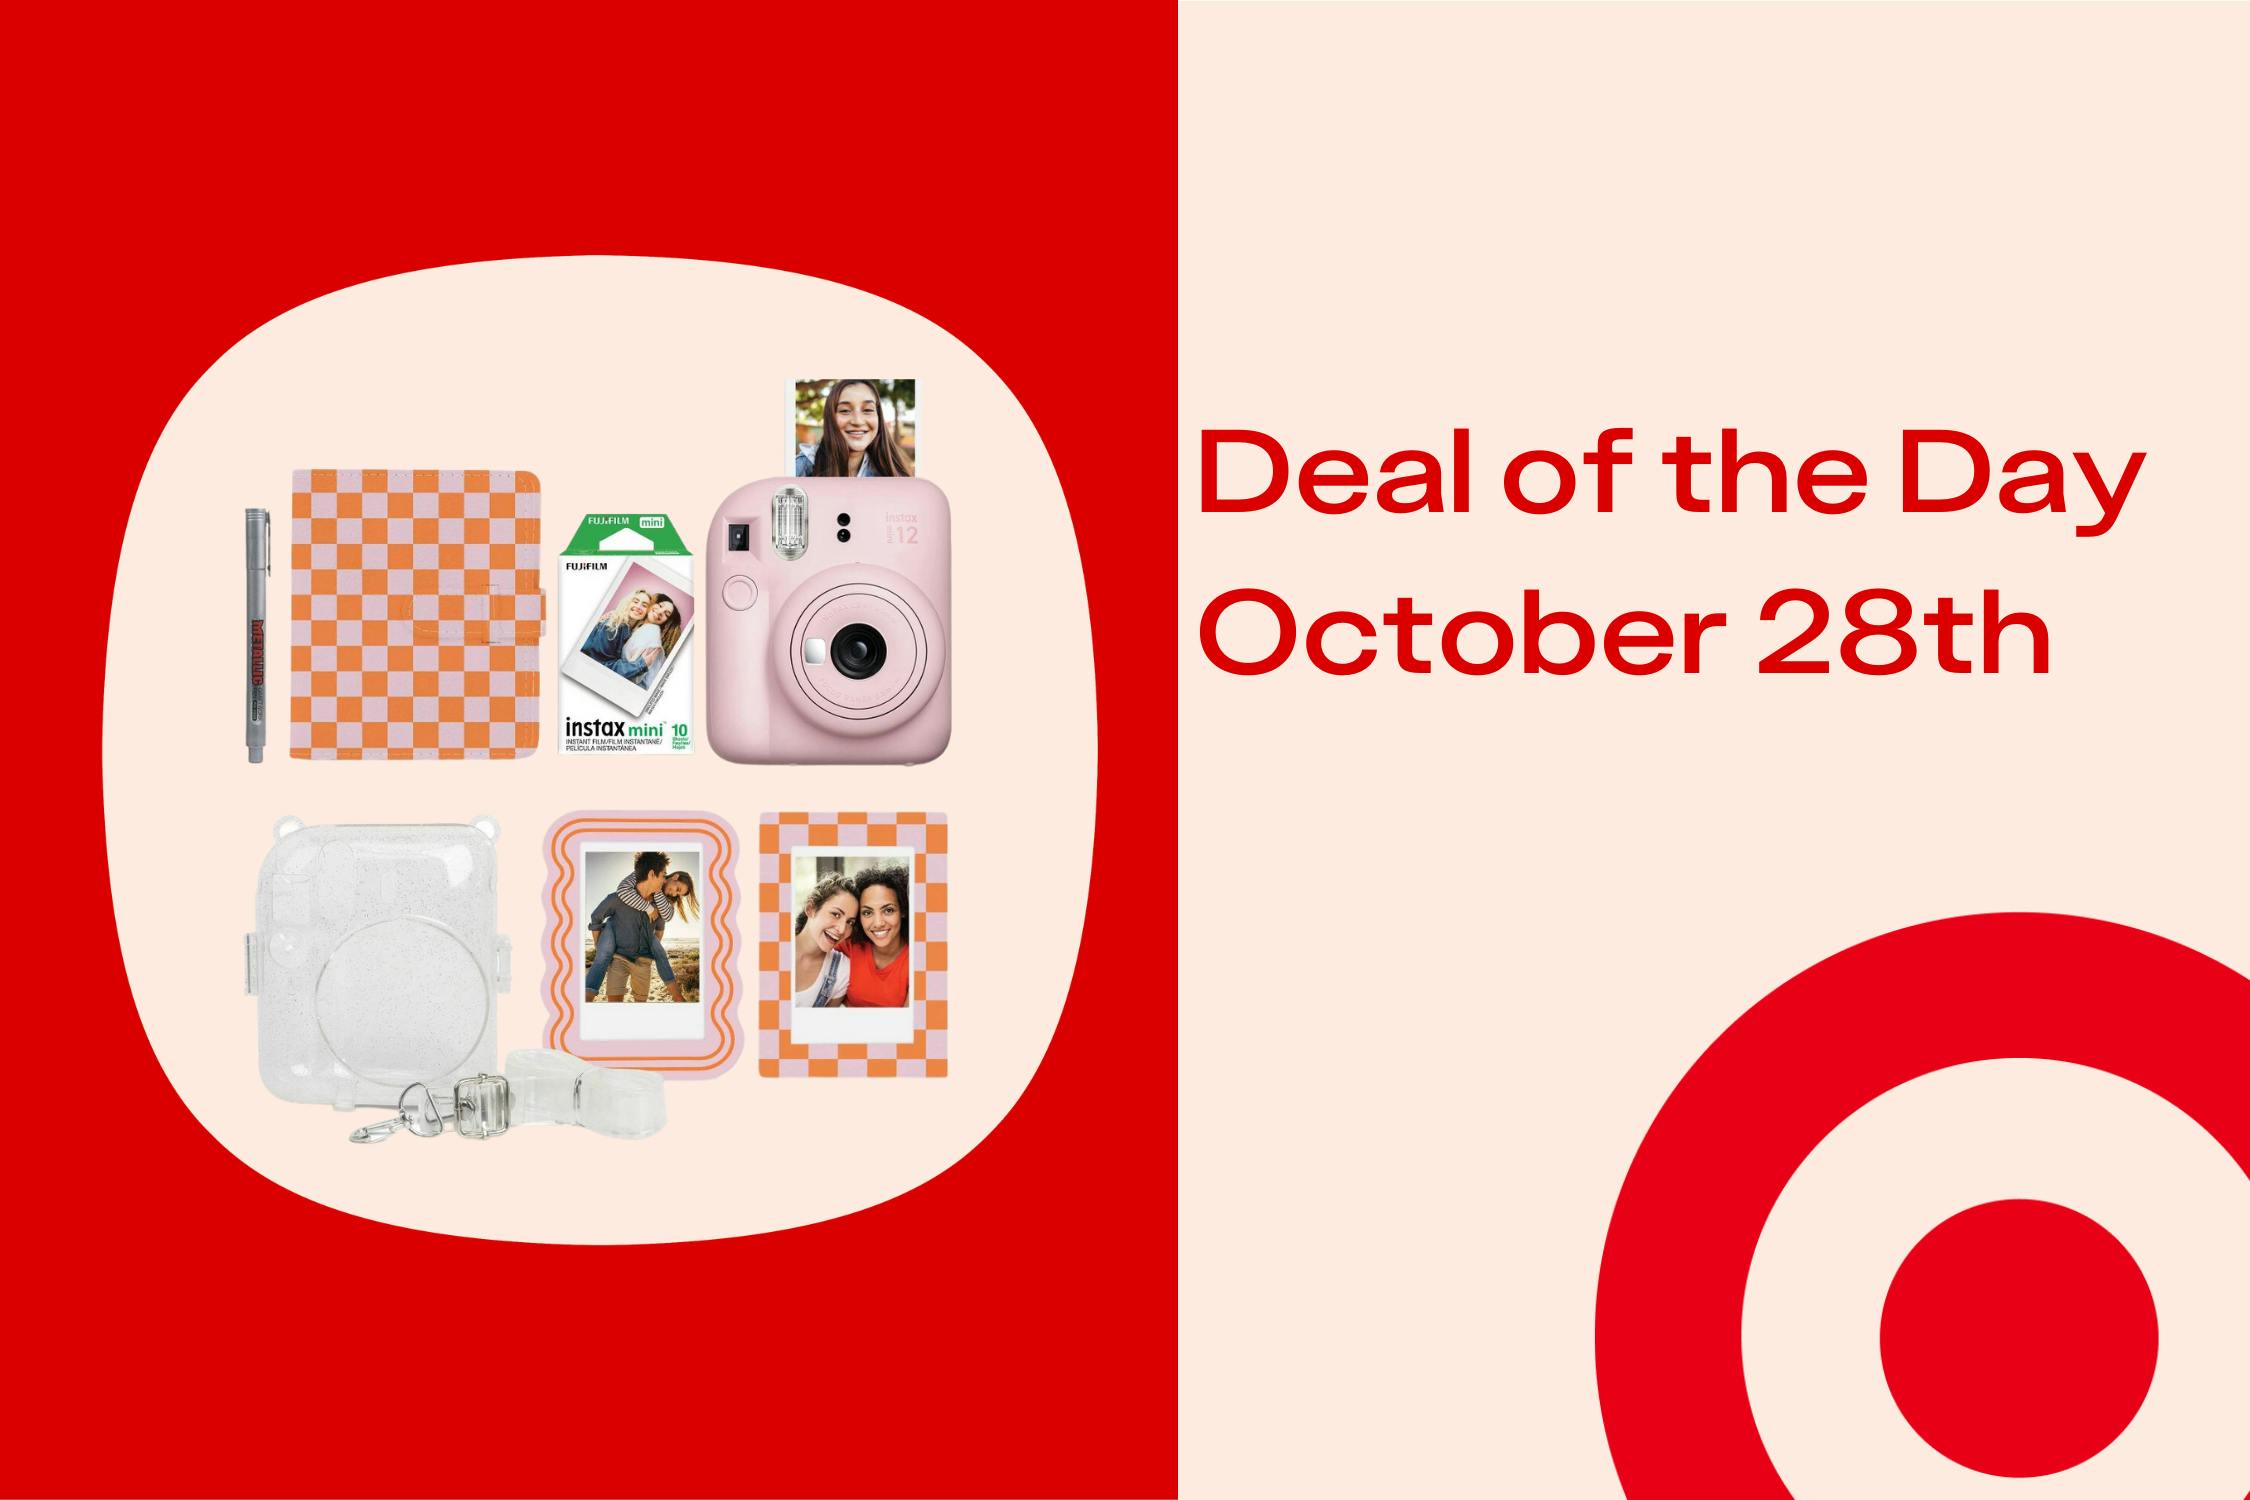 Get Ready for Season-long Savings! Target Deal Days is Back and We've Got a  New Holiday Price Match Guarantee